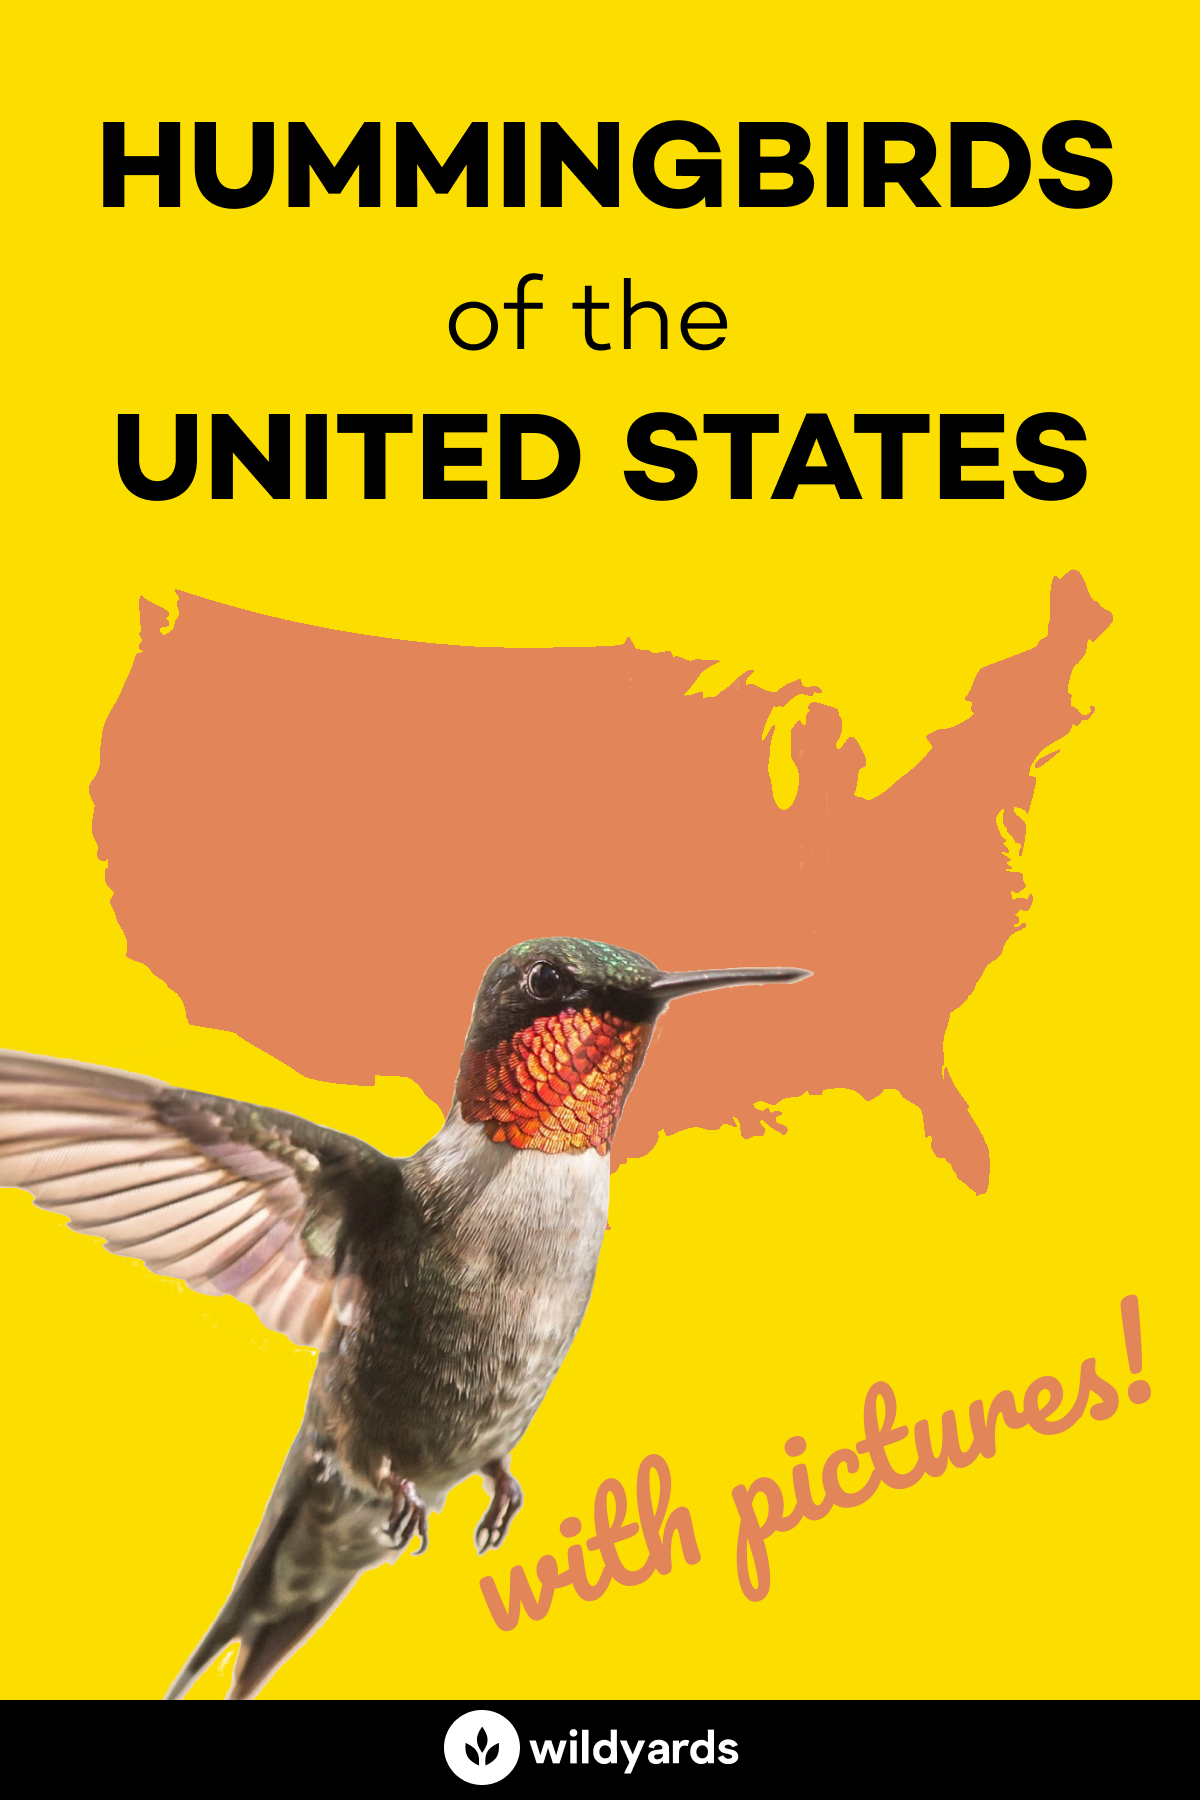 Hummingbirds of the United States
